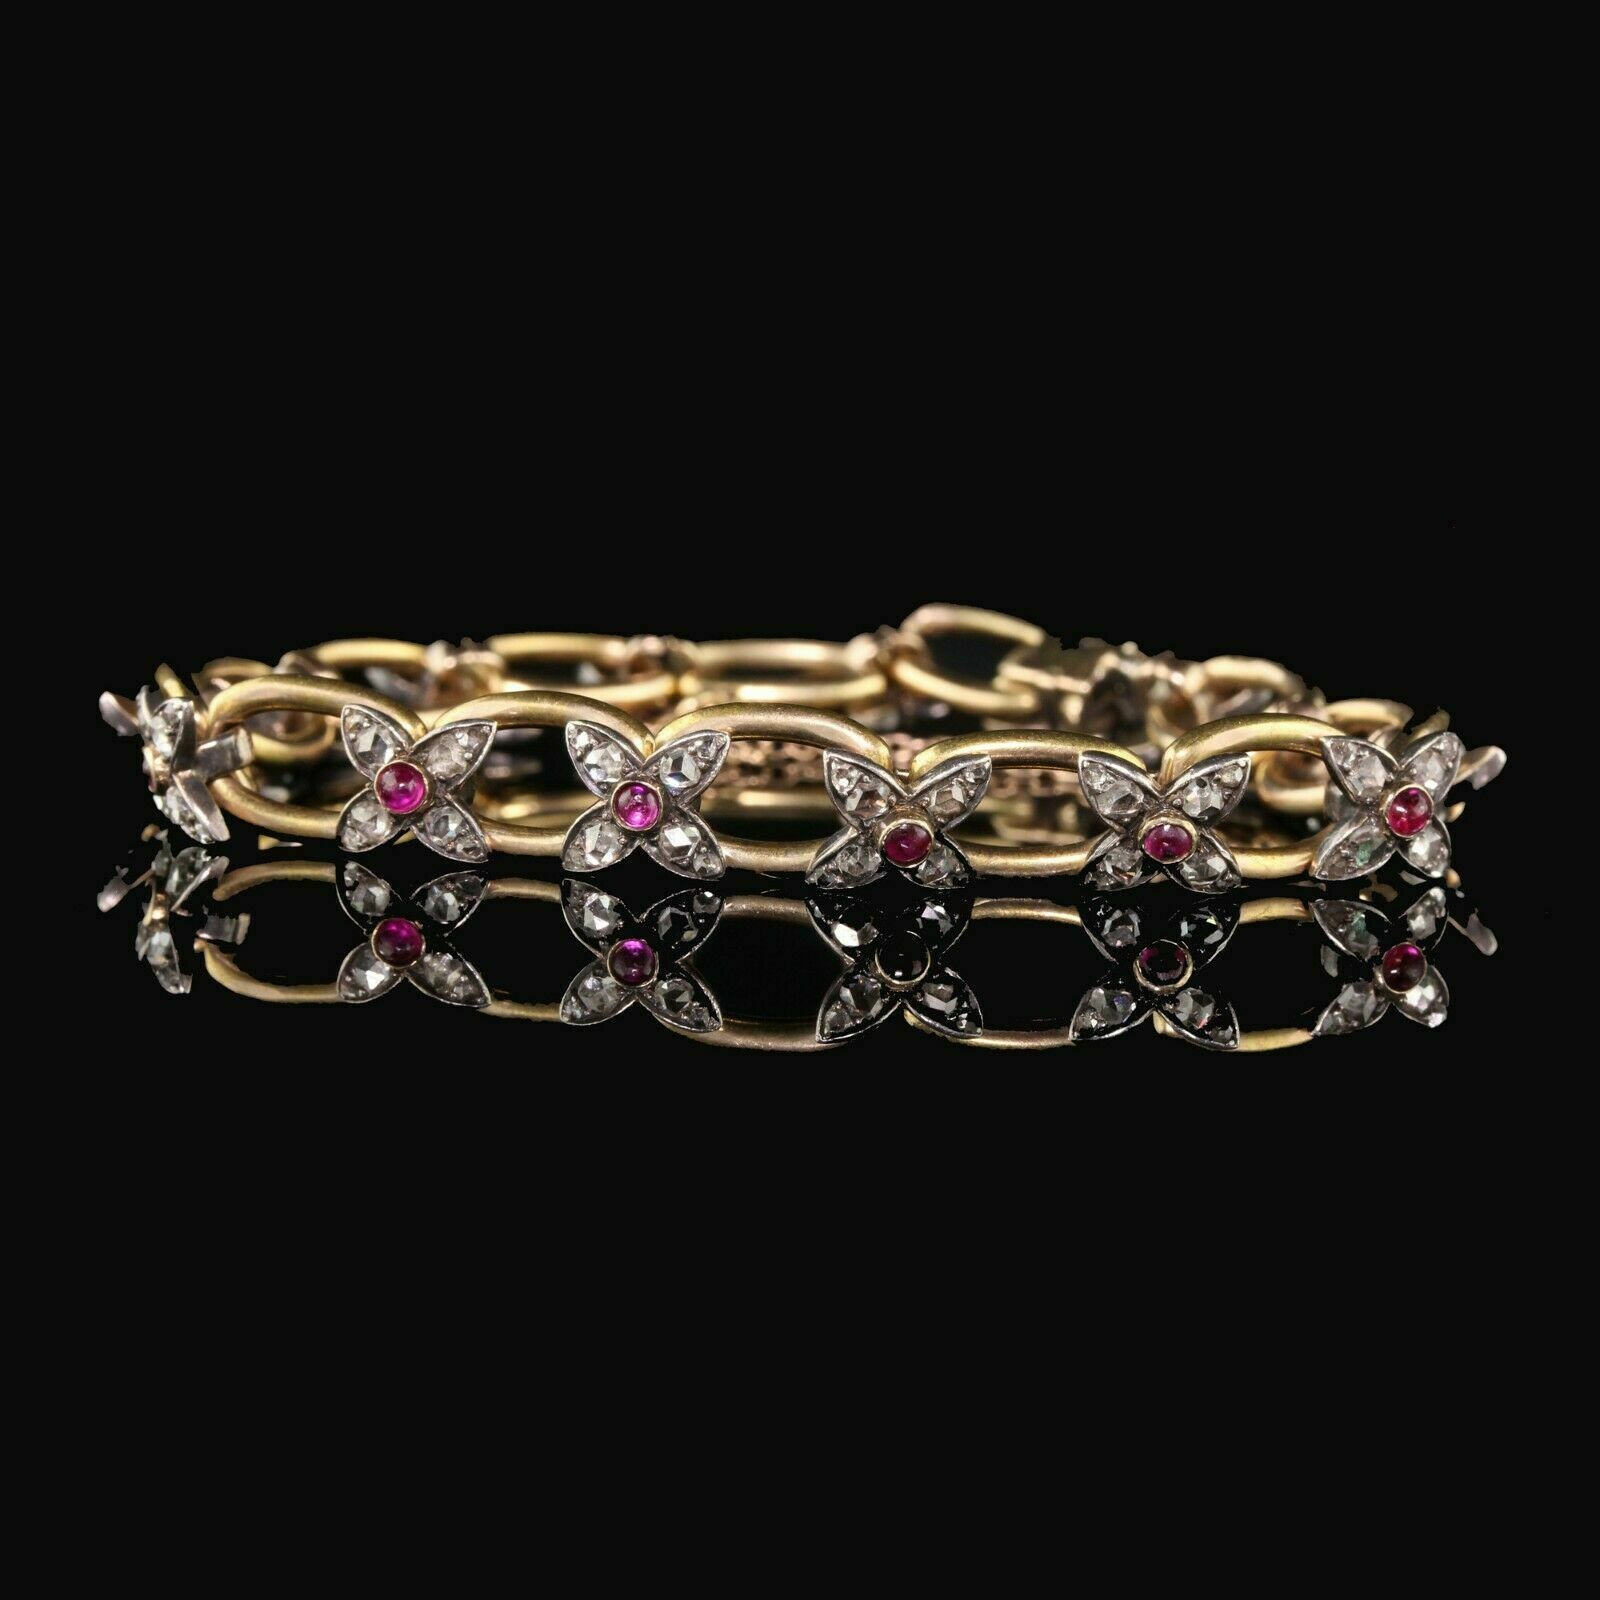 Antique Victorian 18K Two Tone Gold Over Round Diamond and Ruby Bracelet 4.85Ct